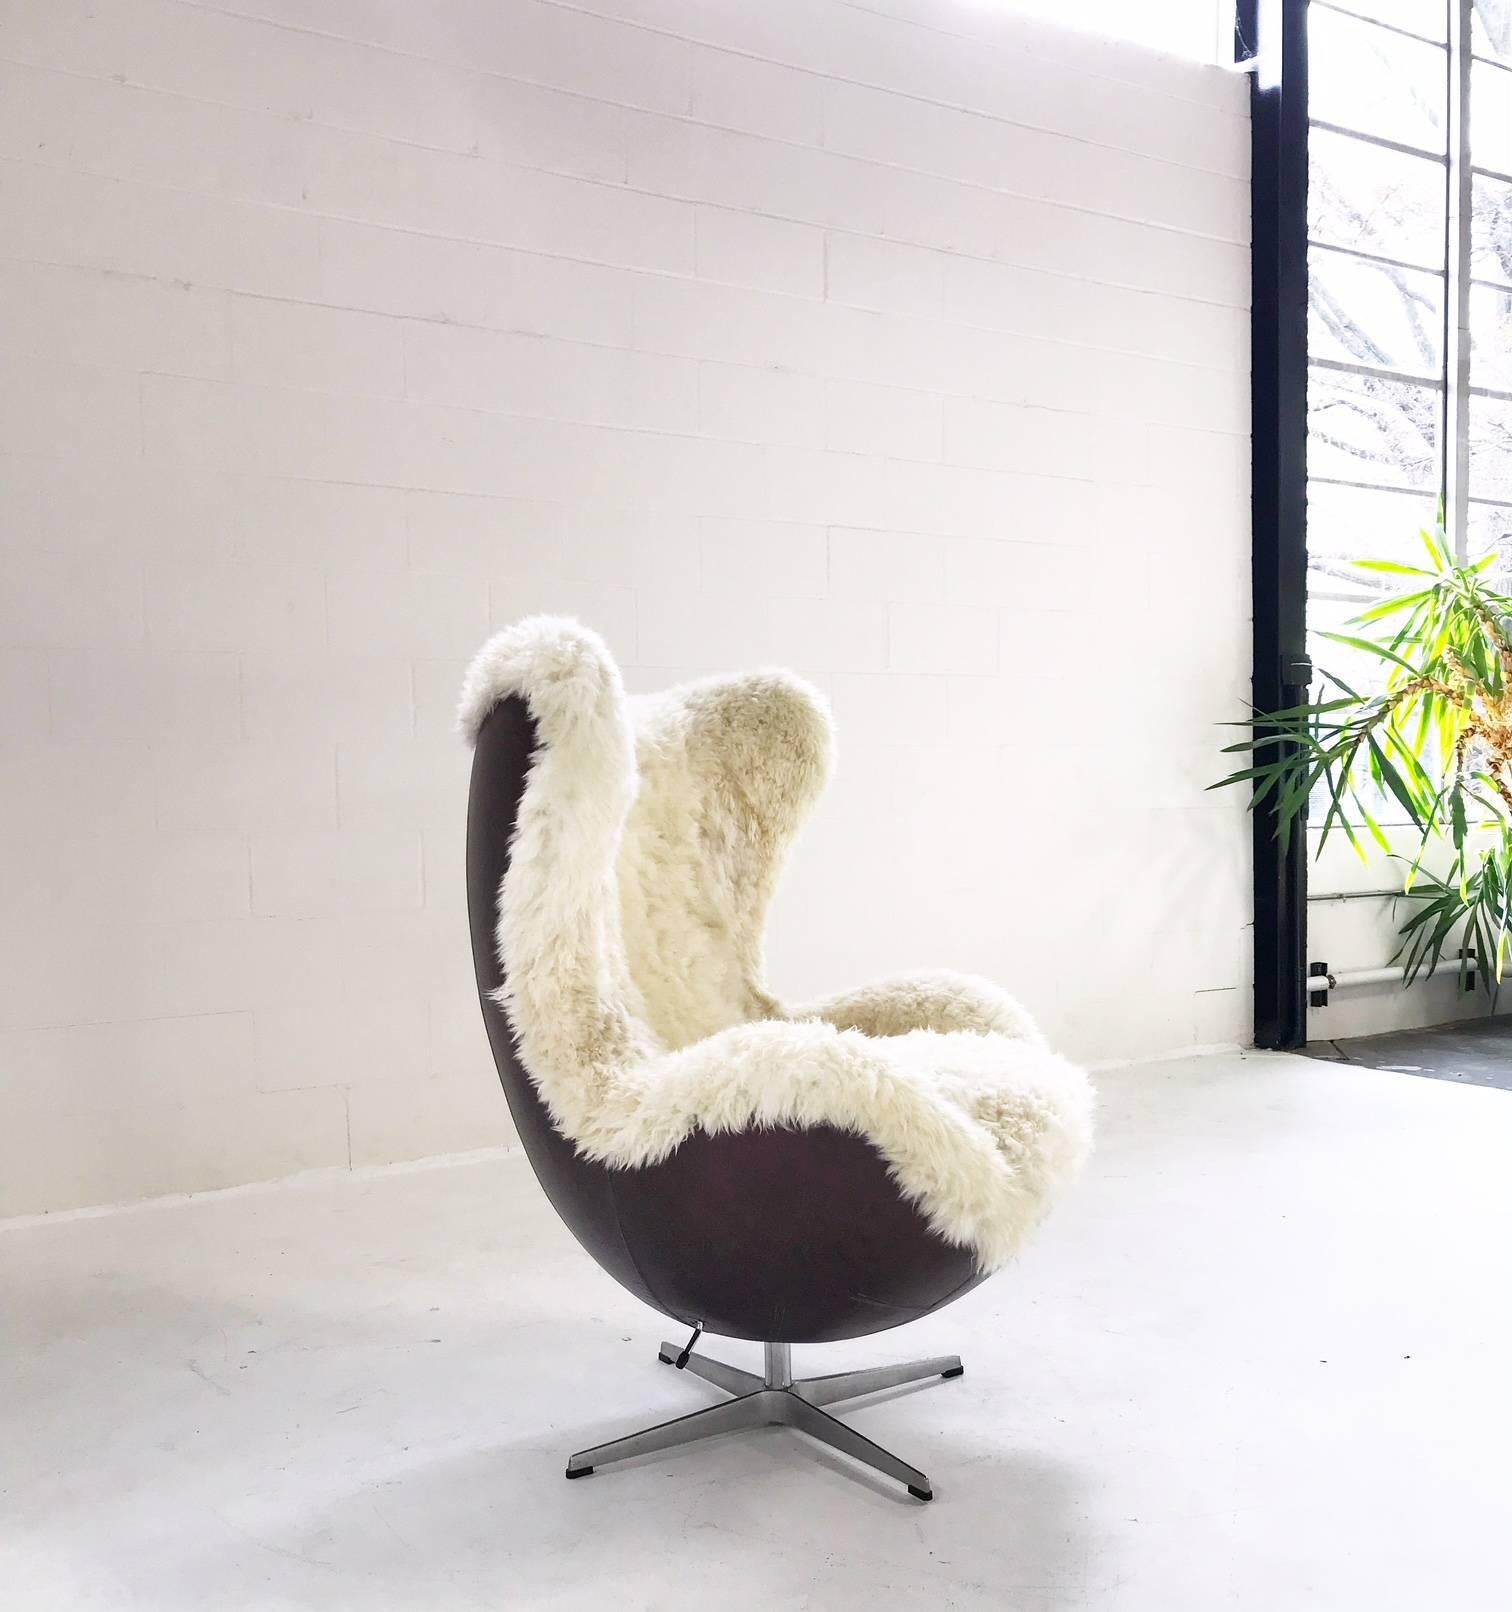 Ask any lover of midcentury furniture to name the top five iconic chairs of mcm design and we guarantee the egg chair would be on that list. Our design team was over the moon when we collected the amazing, original Arne Jacobsen egg chair. Jacobsen